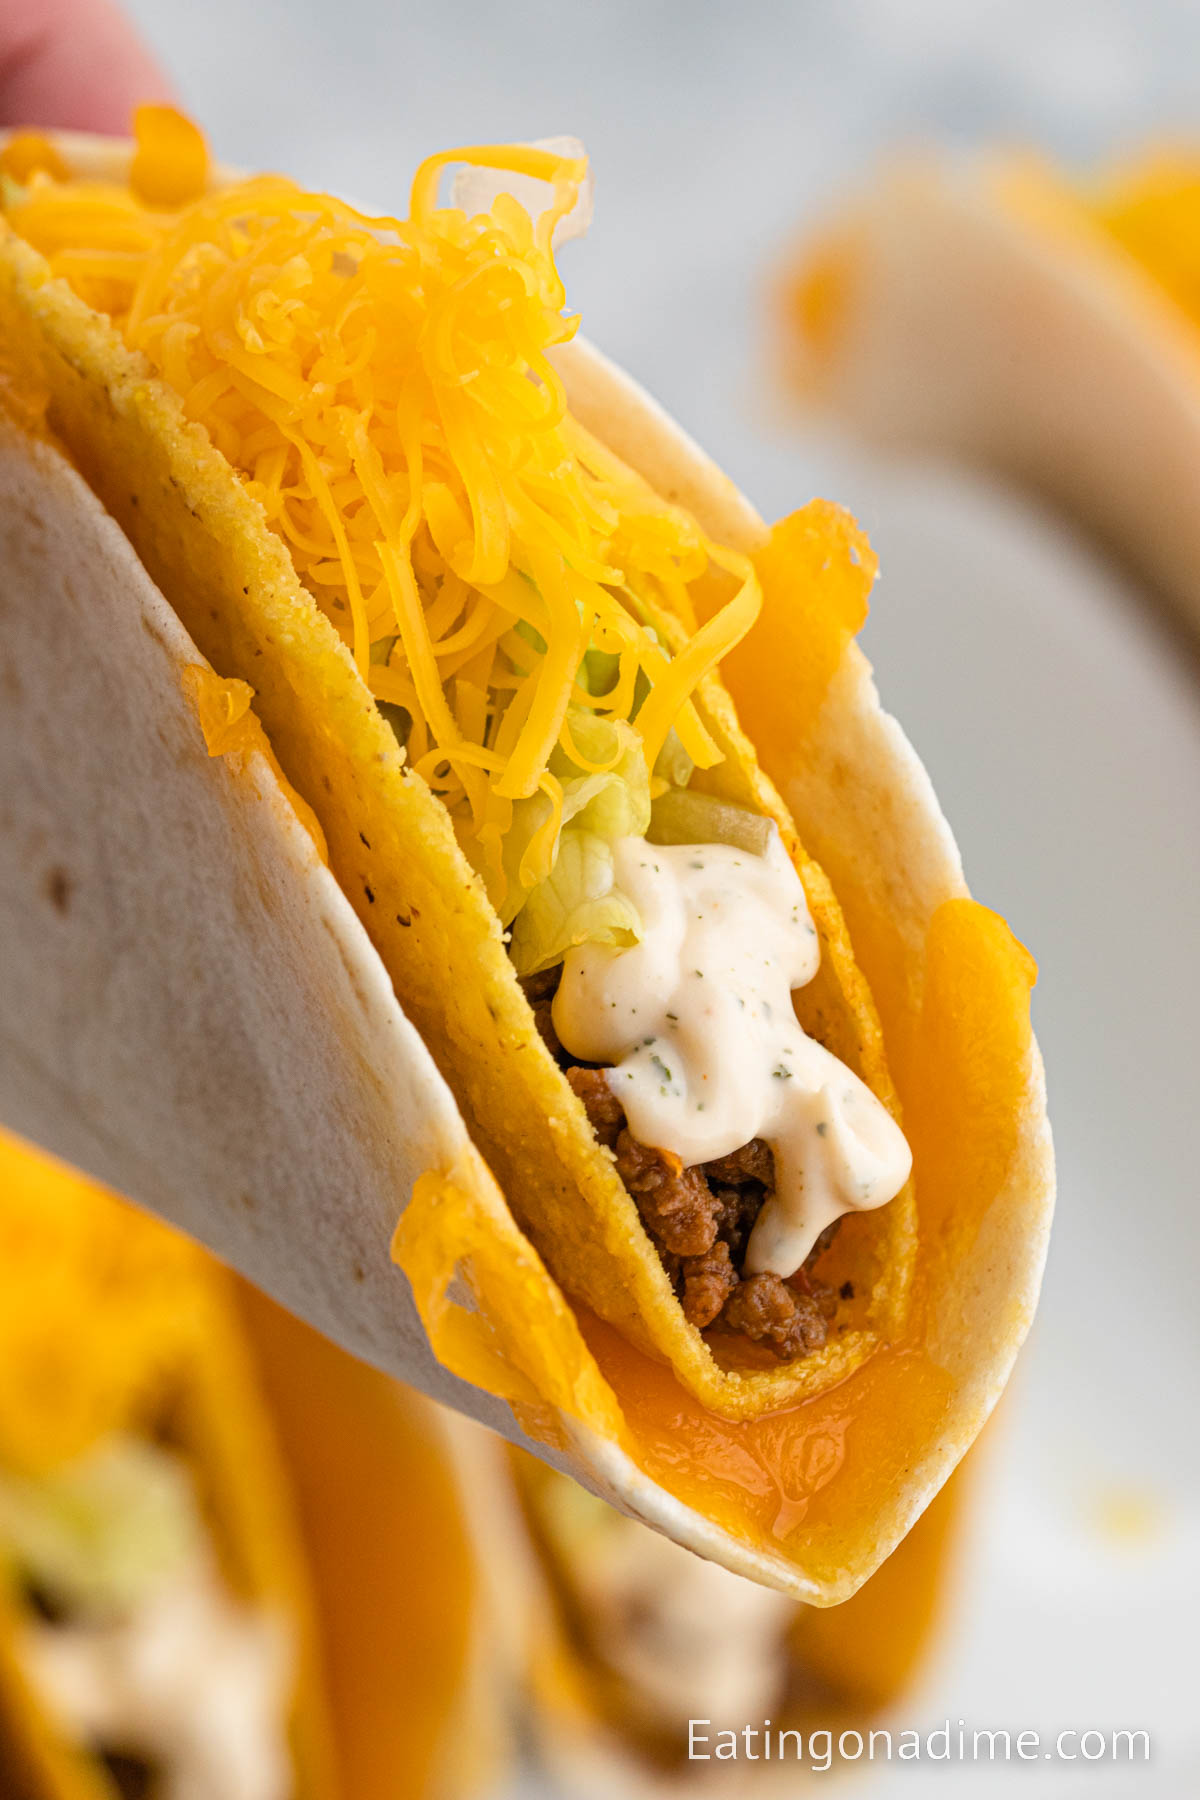 Taco Bell Cheesy Gordita Crunch being held close up